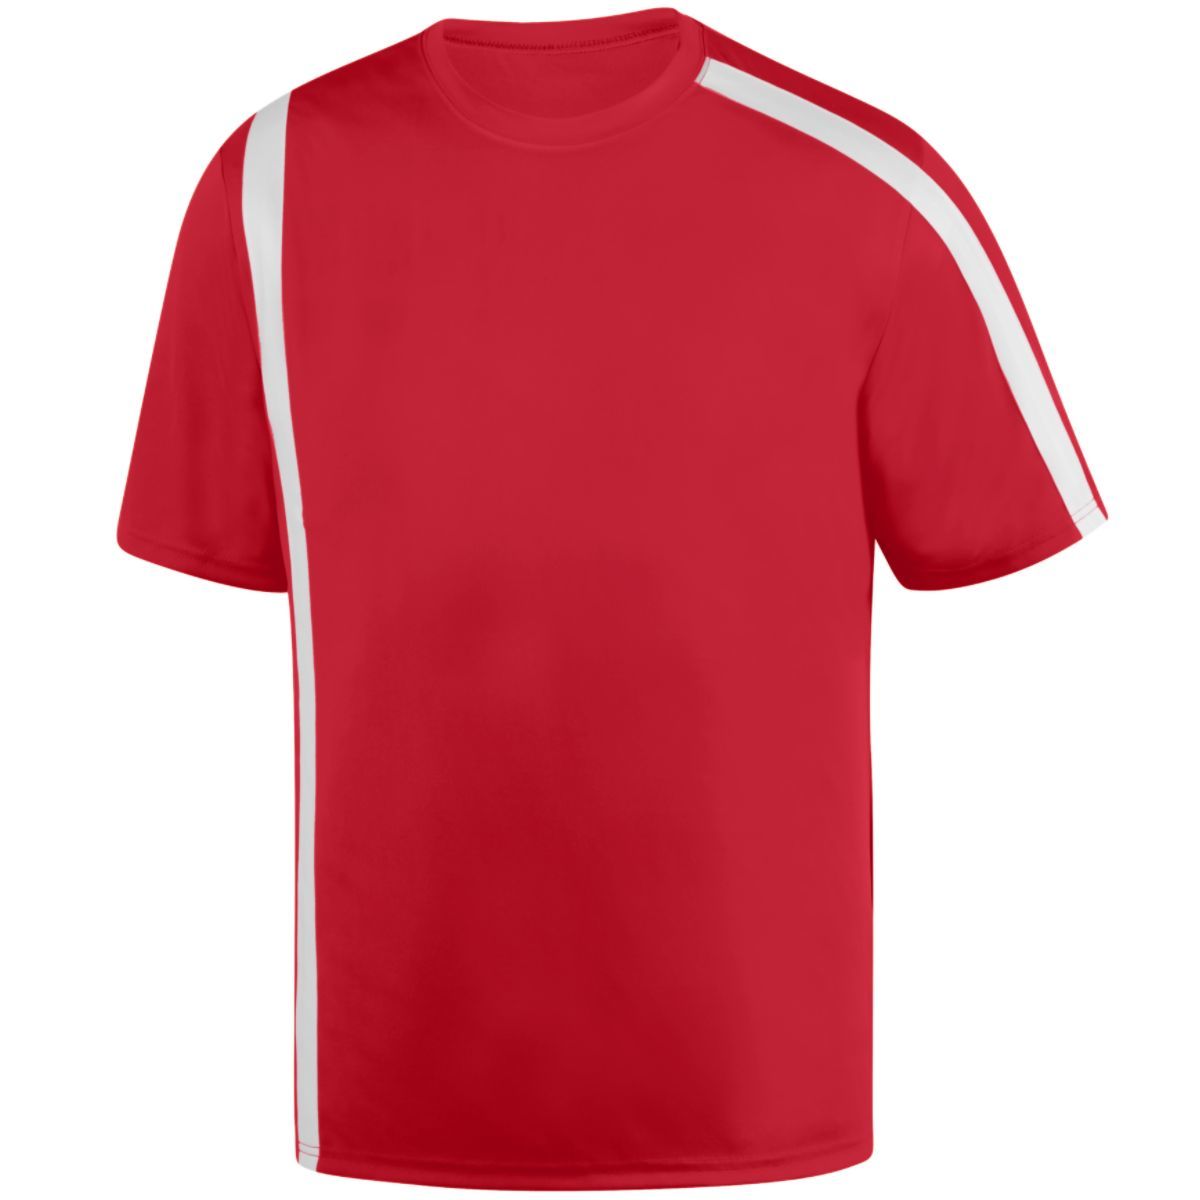 Augusta Sportswear Attacking Third Jersey in Red/White  -Part of the Adult, Adult-Jersey, Augusta-Products, Soccer, Shirts, All-Sports-1 product lines at KanaleyCreations.com